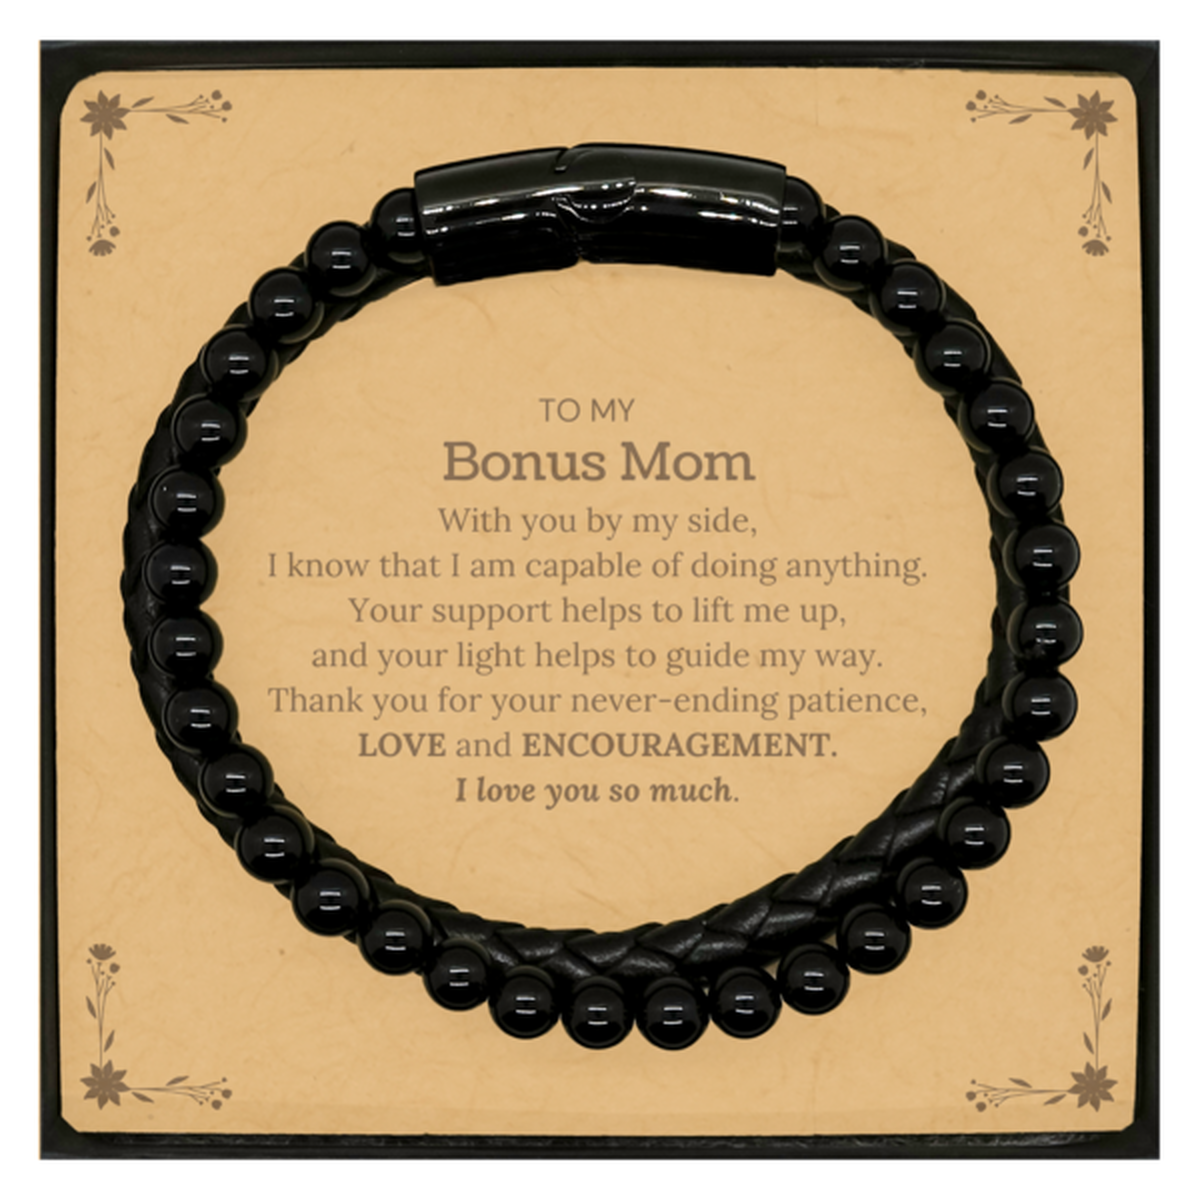 Appreciation Bonus Mom Stone Leather Bracelets Gifts, To My Bonus Mom Birthday Christmas Wedding Keepsake Gifts for Bonus Mom With you by my side, I know that I am capable of doing anything. I love you so much